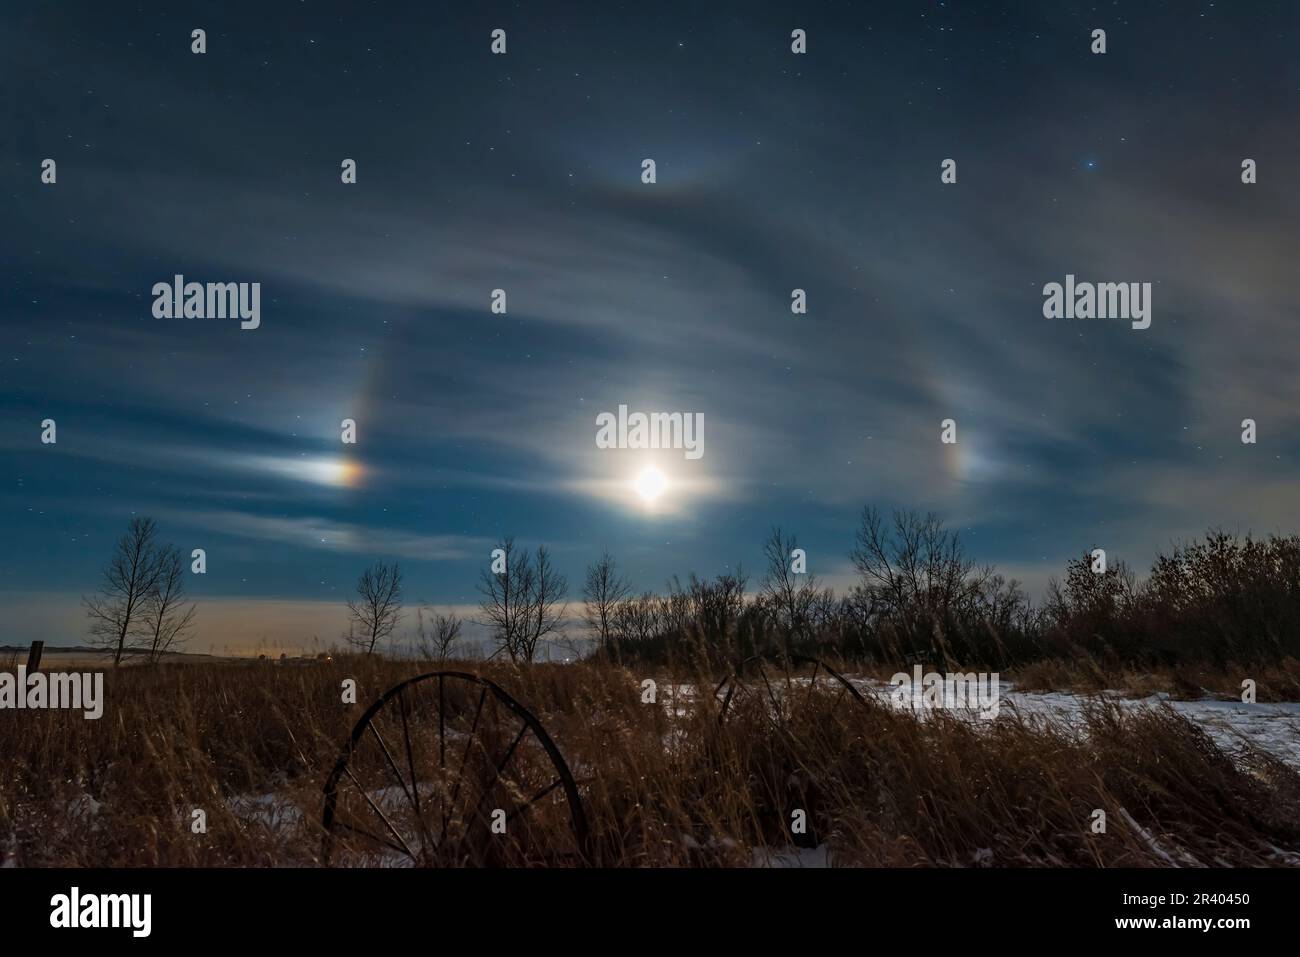 Moondogs around the waxing crescent moon with a lunar halo, Alberta, Canada. Stock Photo